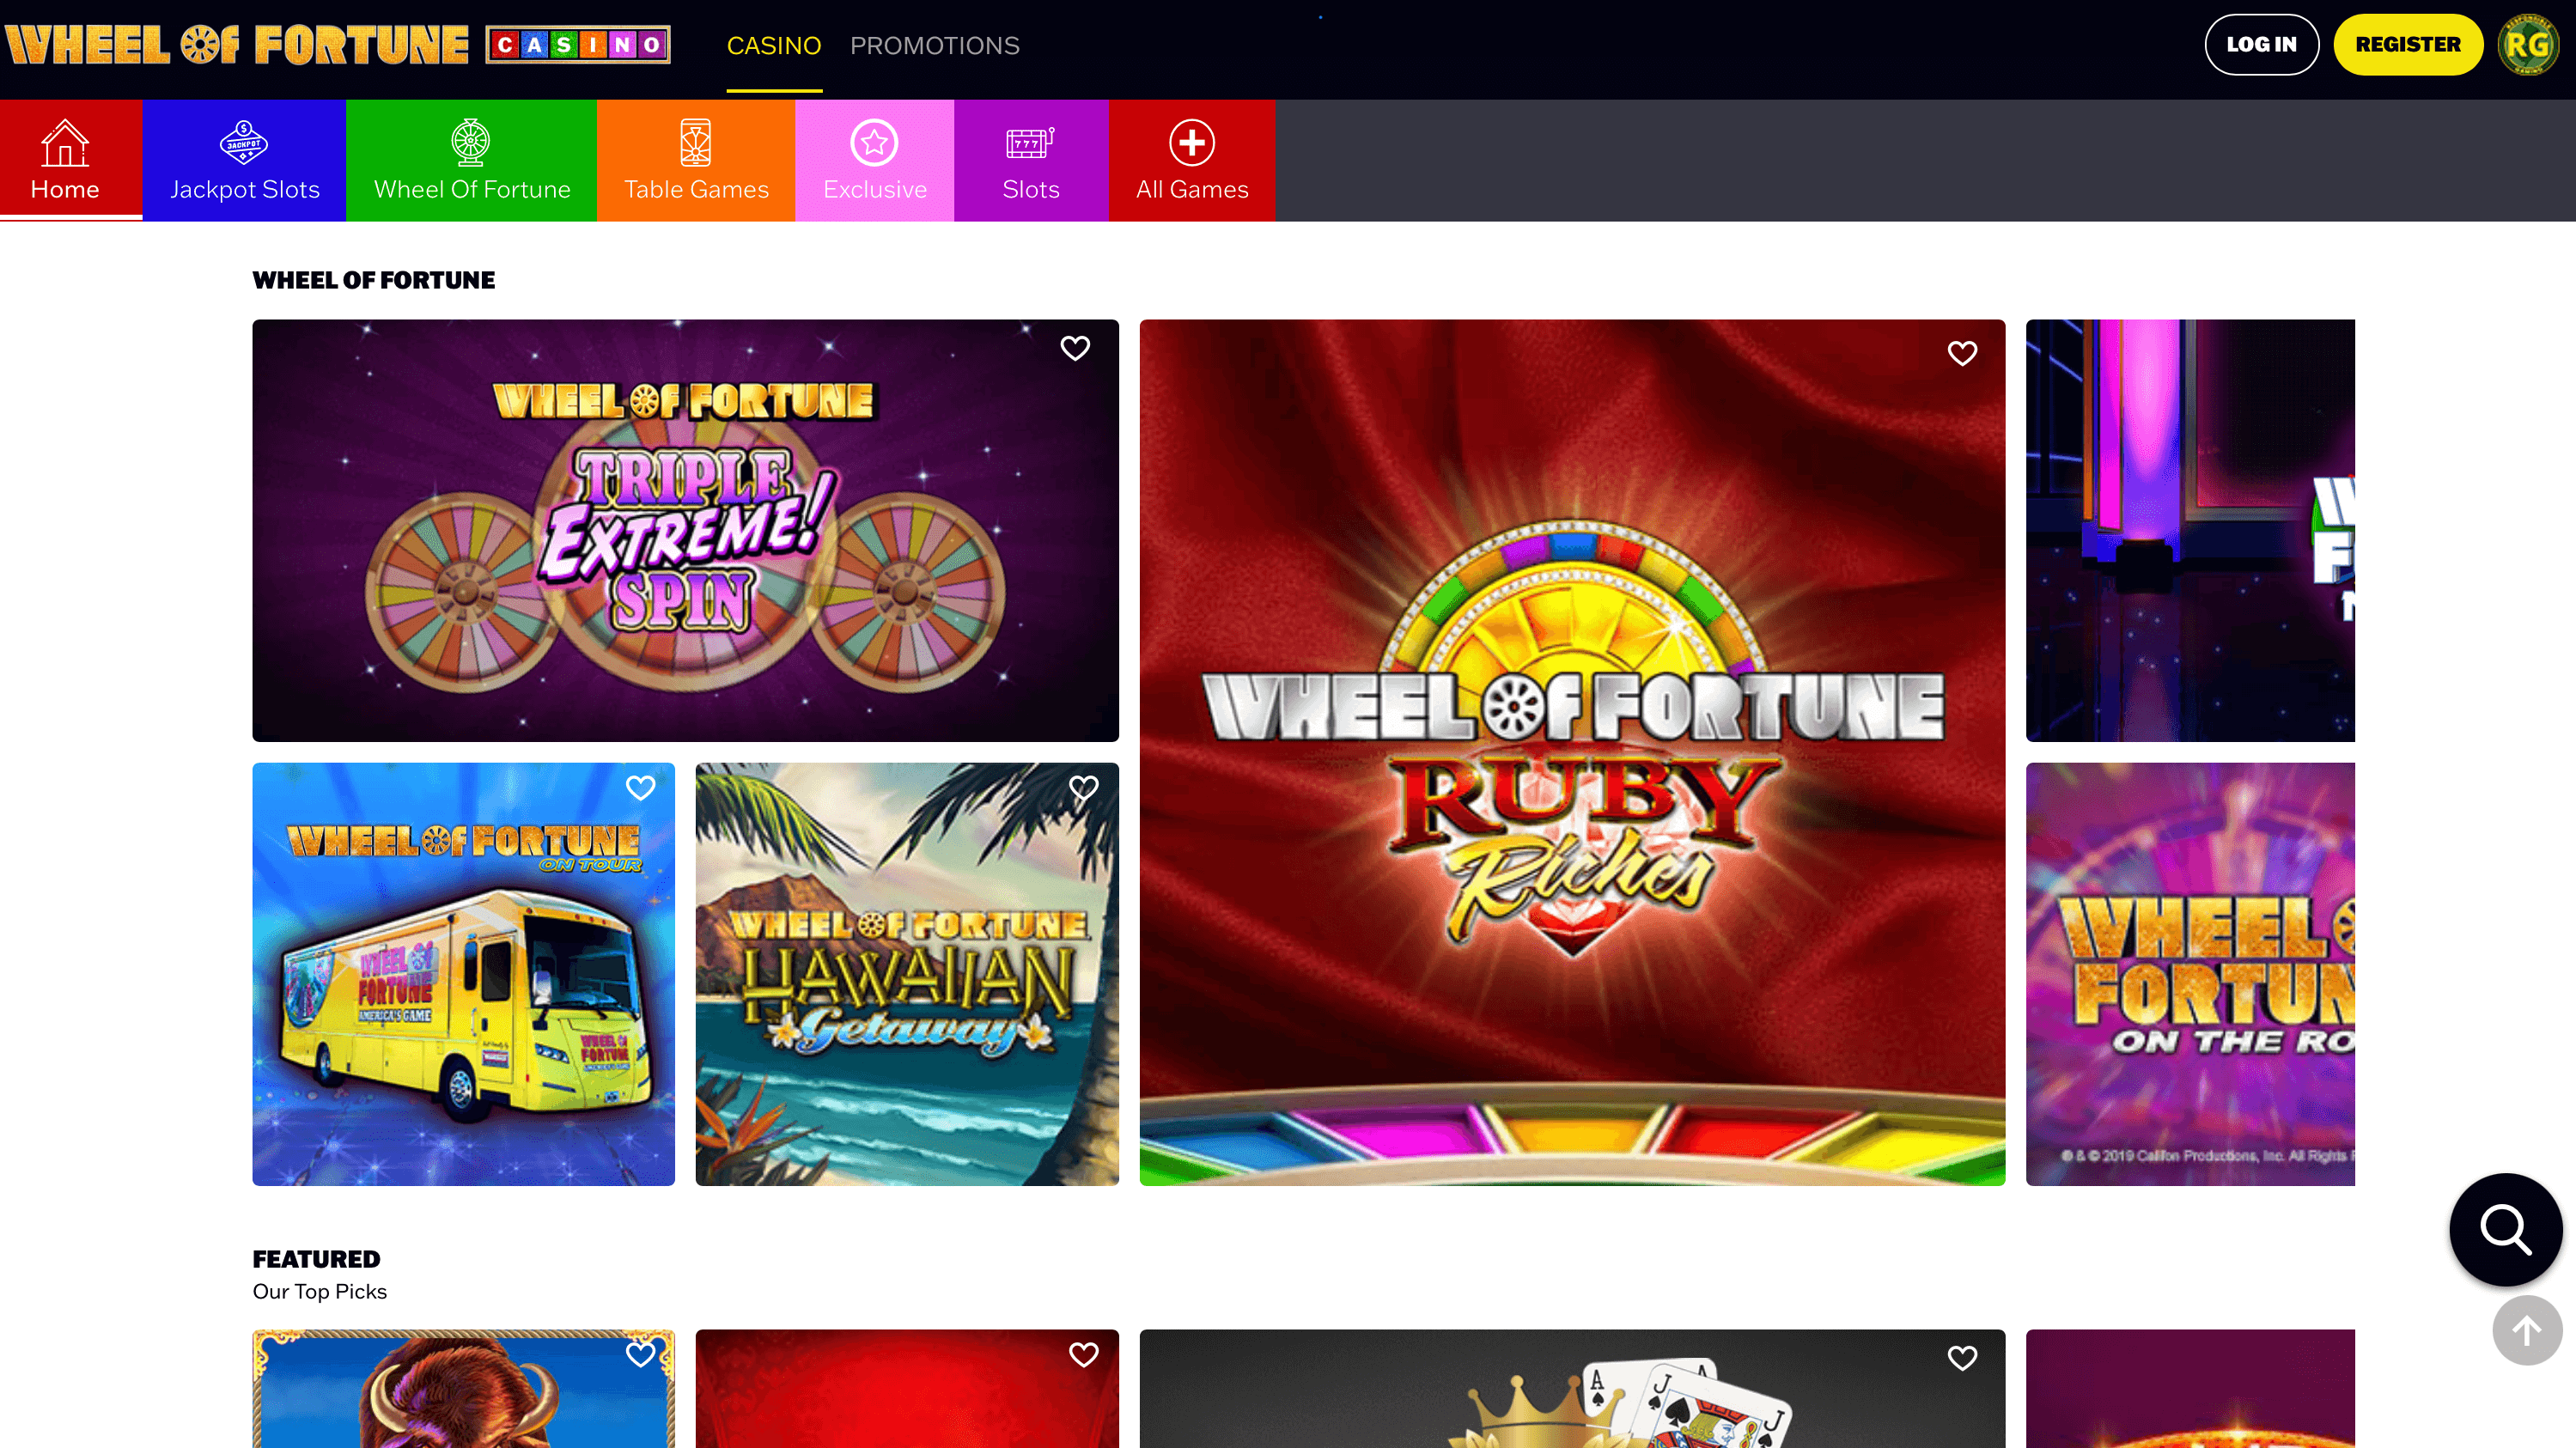 Wheel of Fortune Online Casino Launched with BetMGM